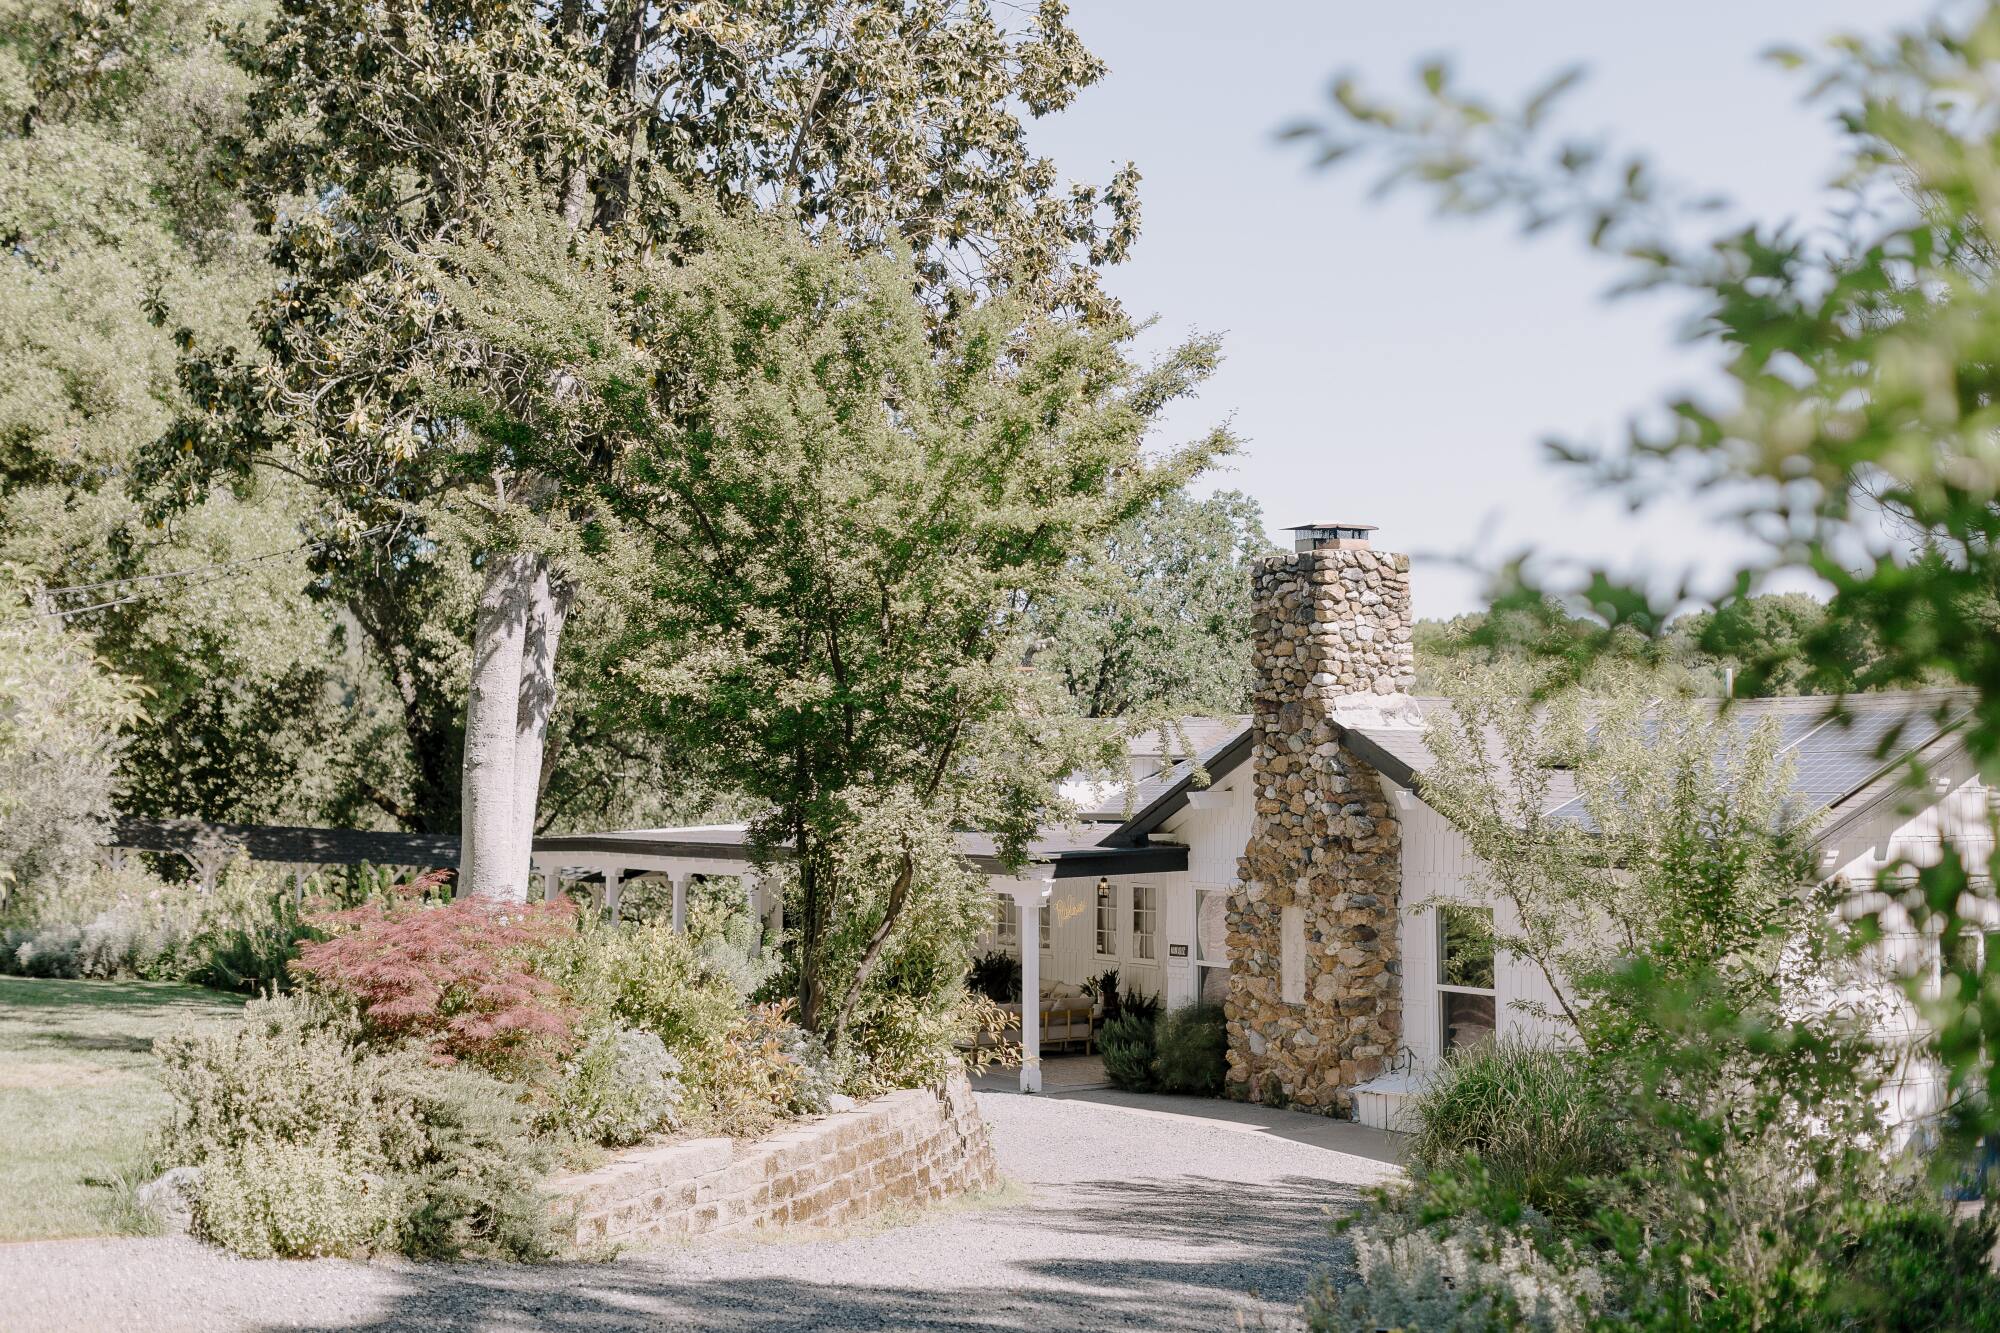 The view down a driveway past trees and shrubs at a white ranch-style house.